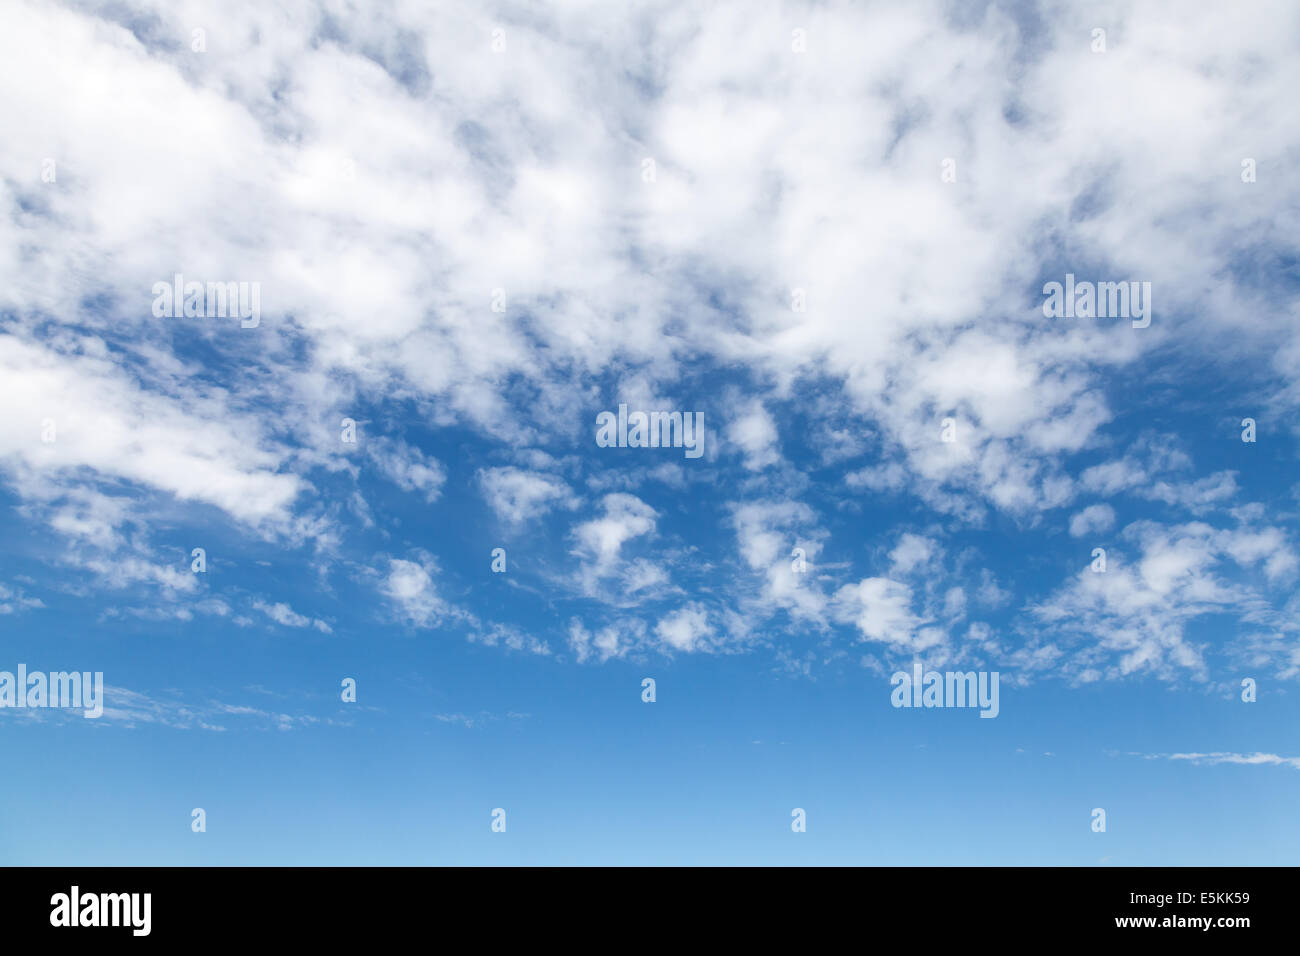 Natural blue sky with clouds, background texture Stock Photo